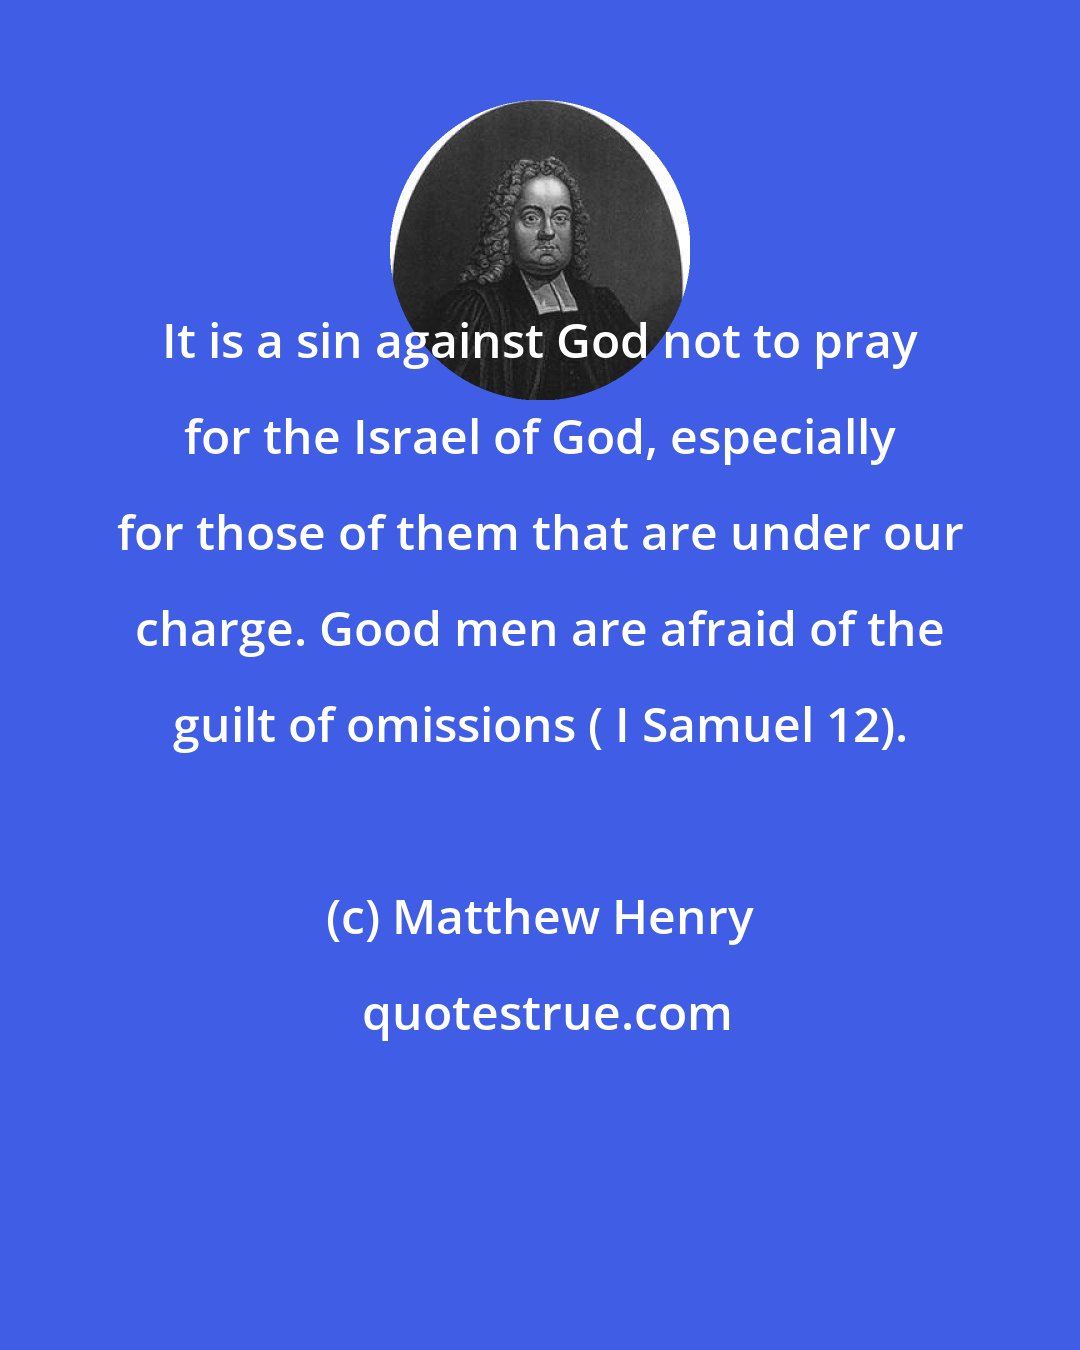 Matthew Henry: It is a sin against God not to pray for the Israel of God, especially for those of them that are under our charge. Good men are afraid of the guilt of omissions ( I Samuel 12).